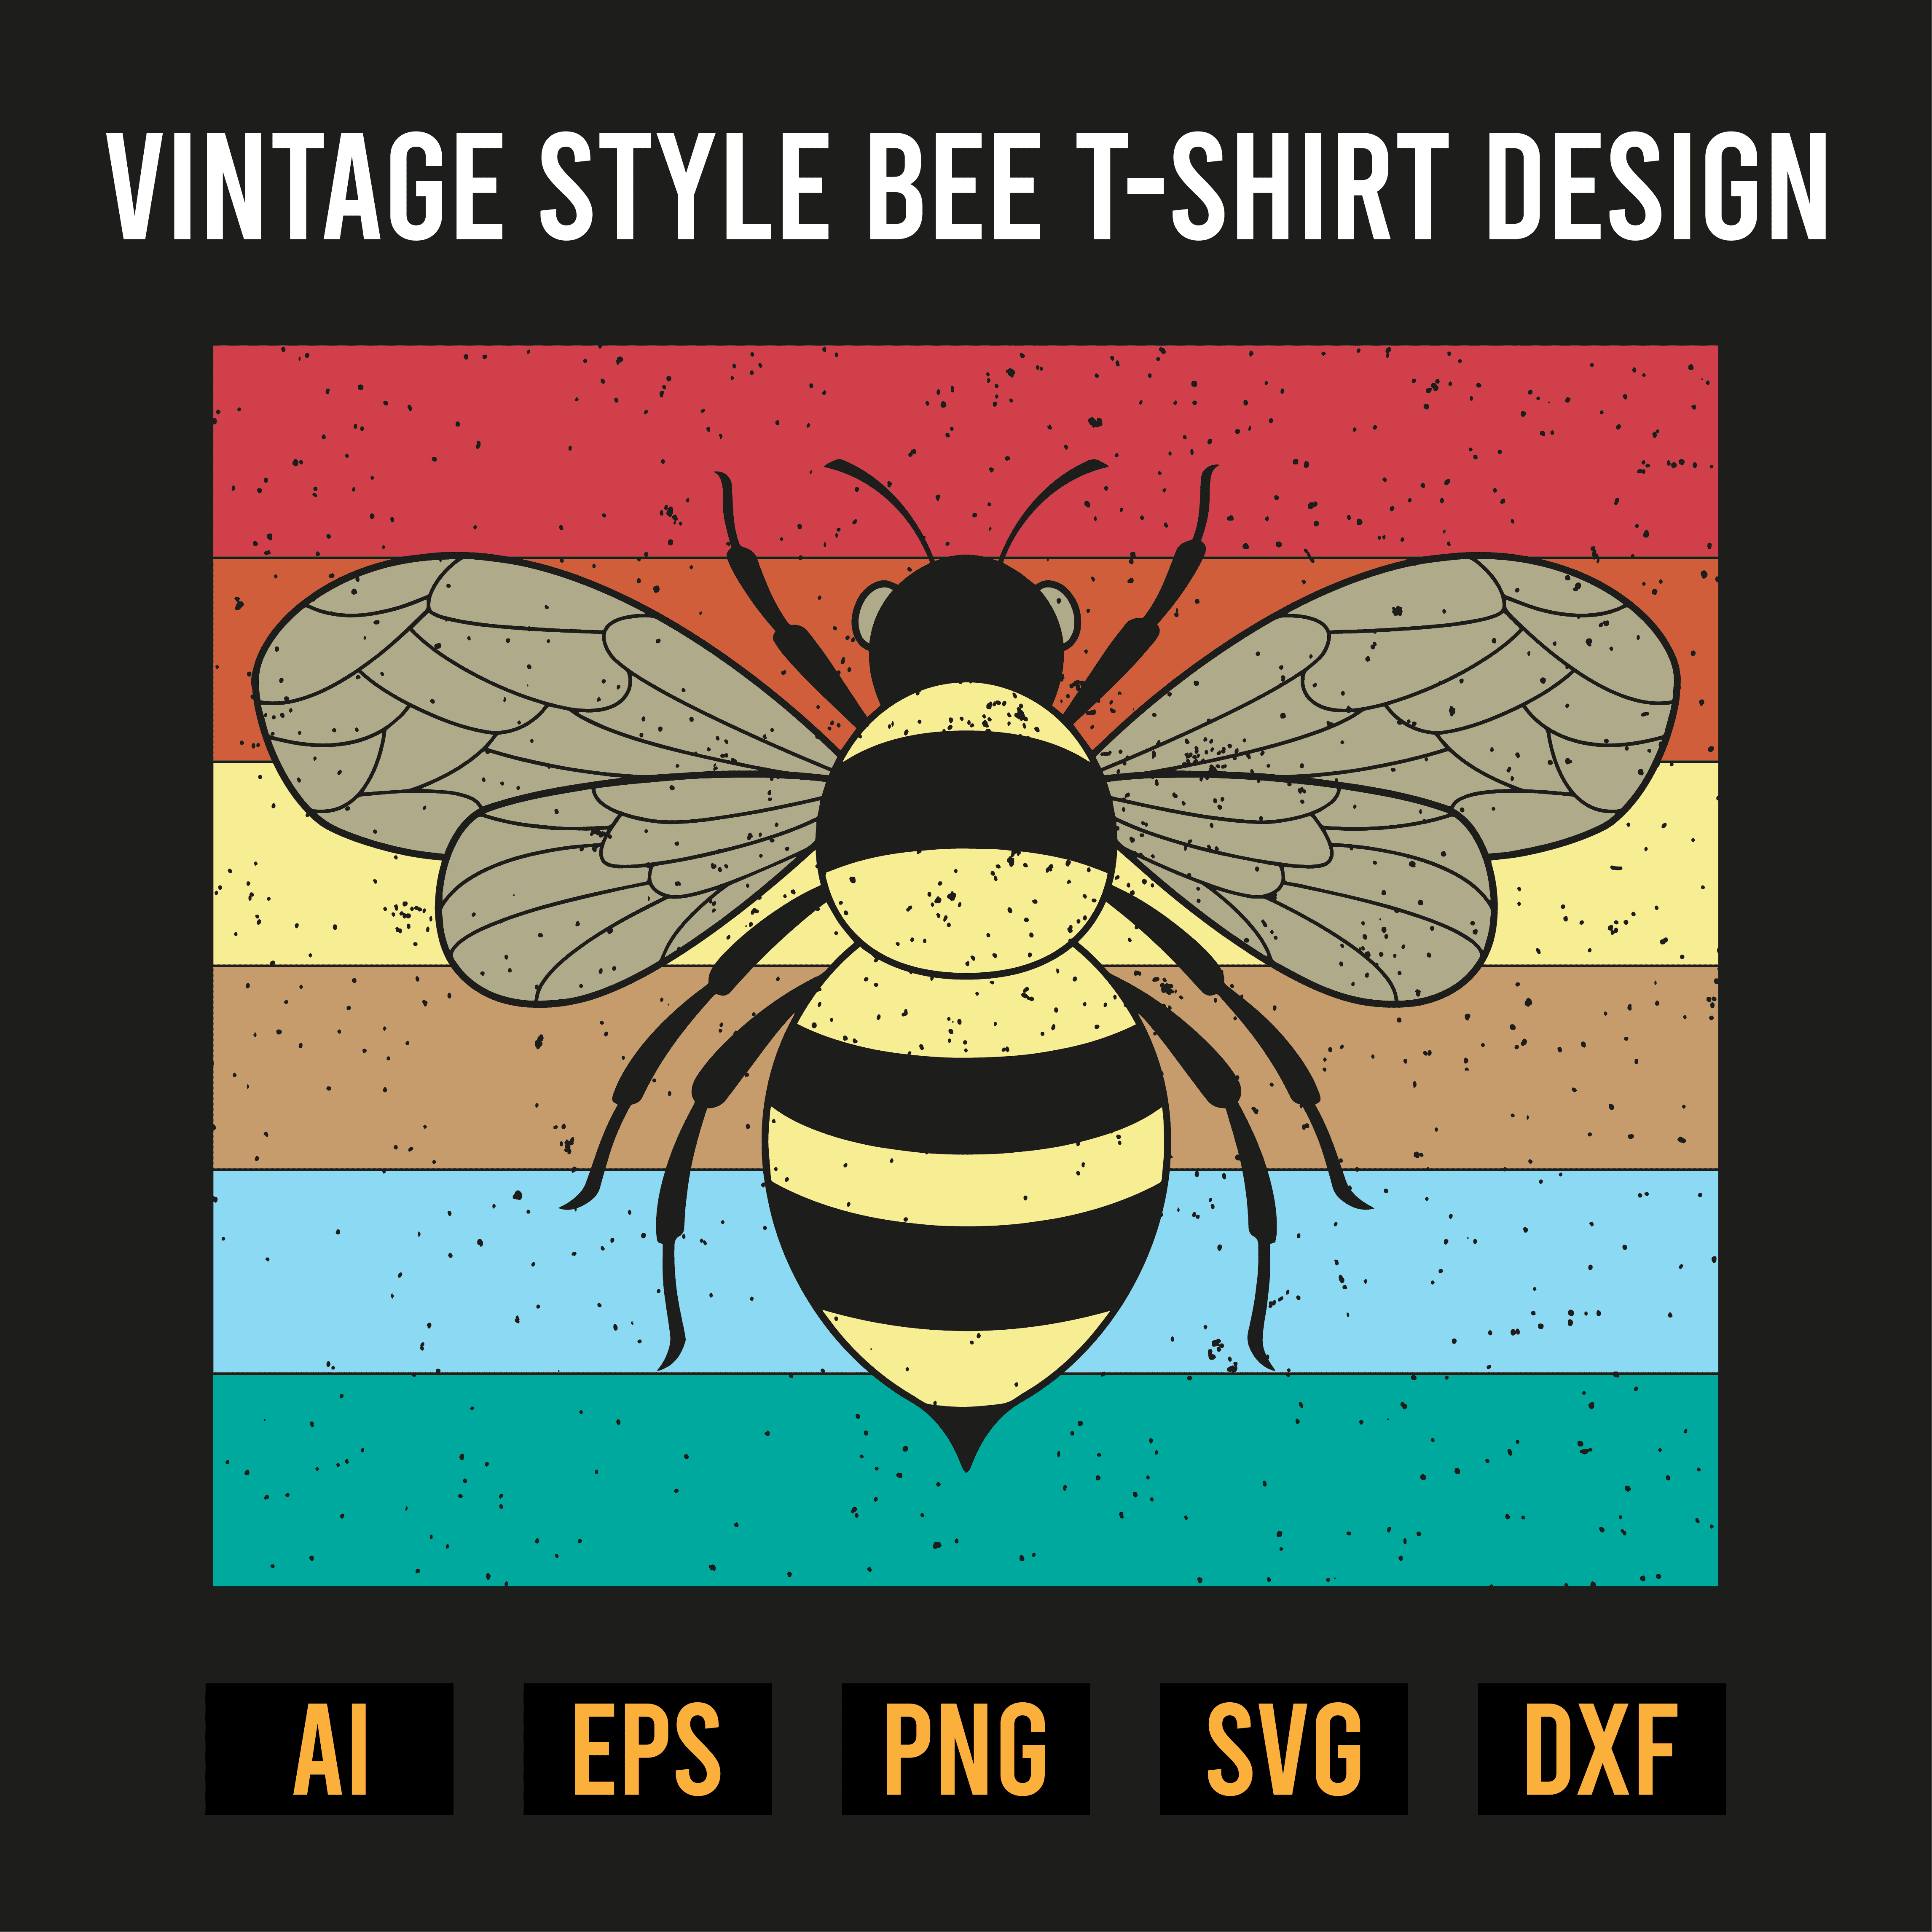 Vintage Style Bee T- Shirt Design cover image.